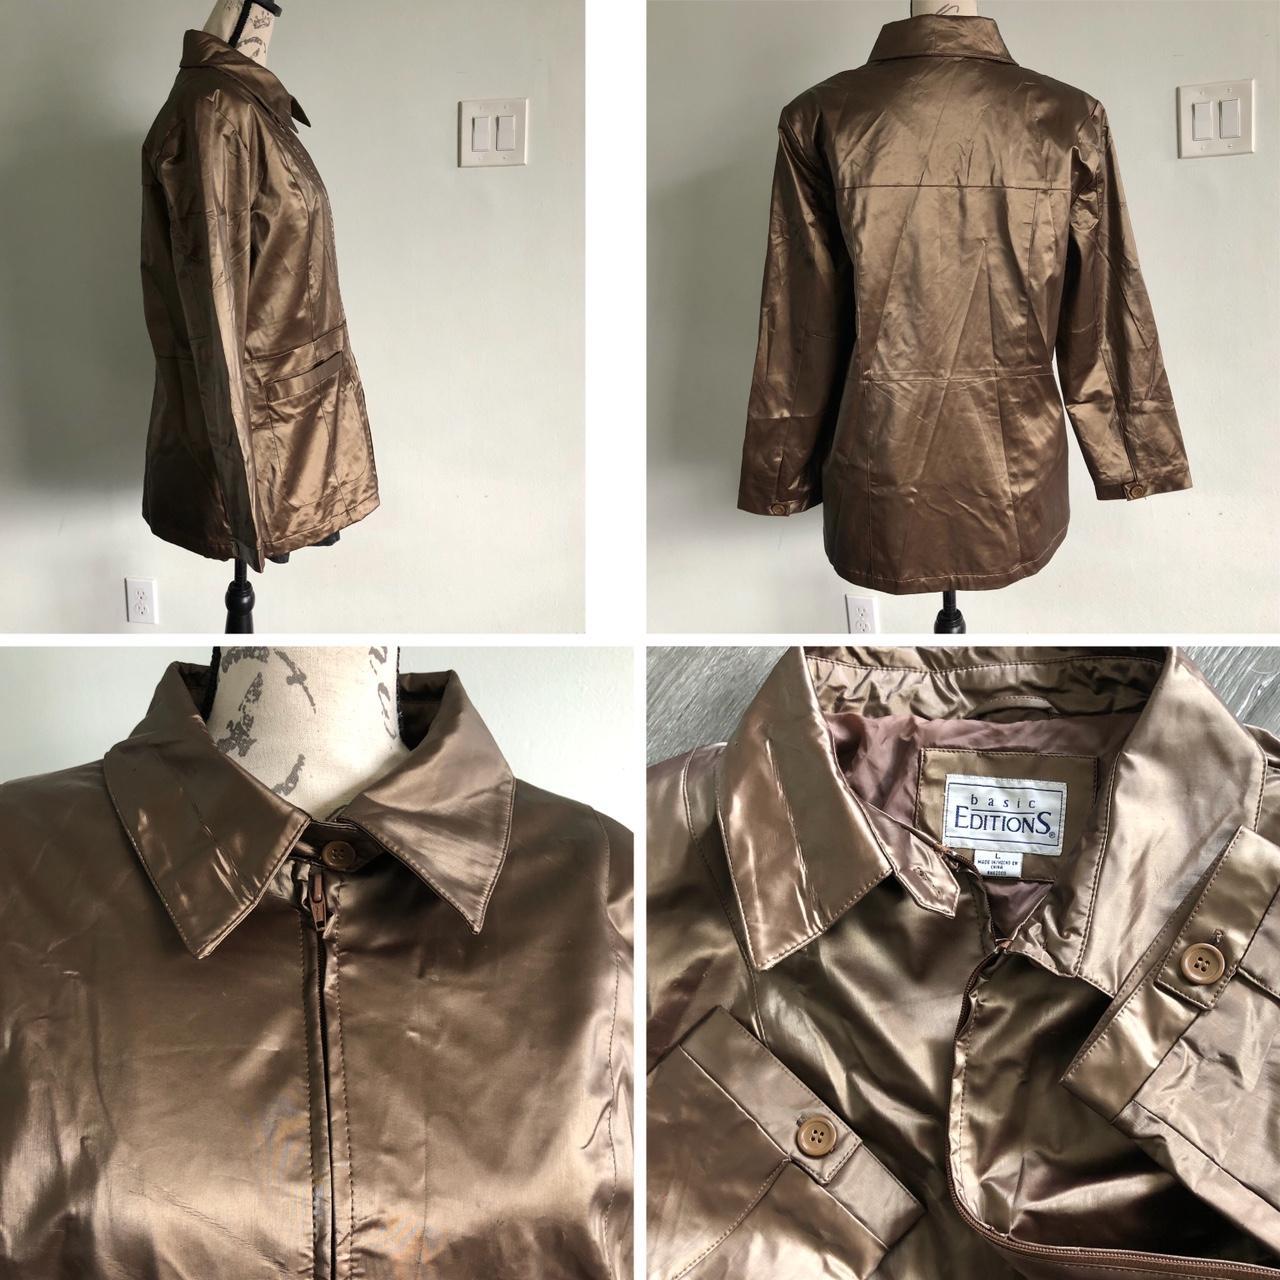 Basic Editions Women's Tan and Brown Jacket (4)